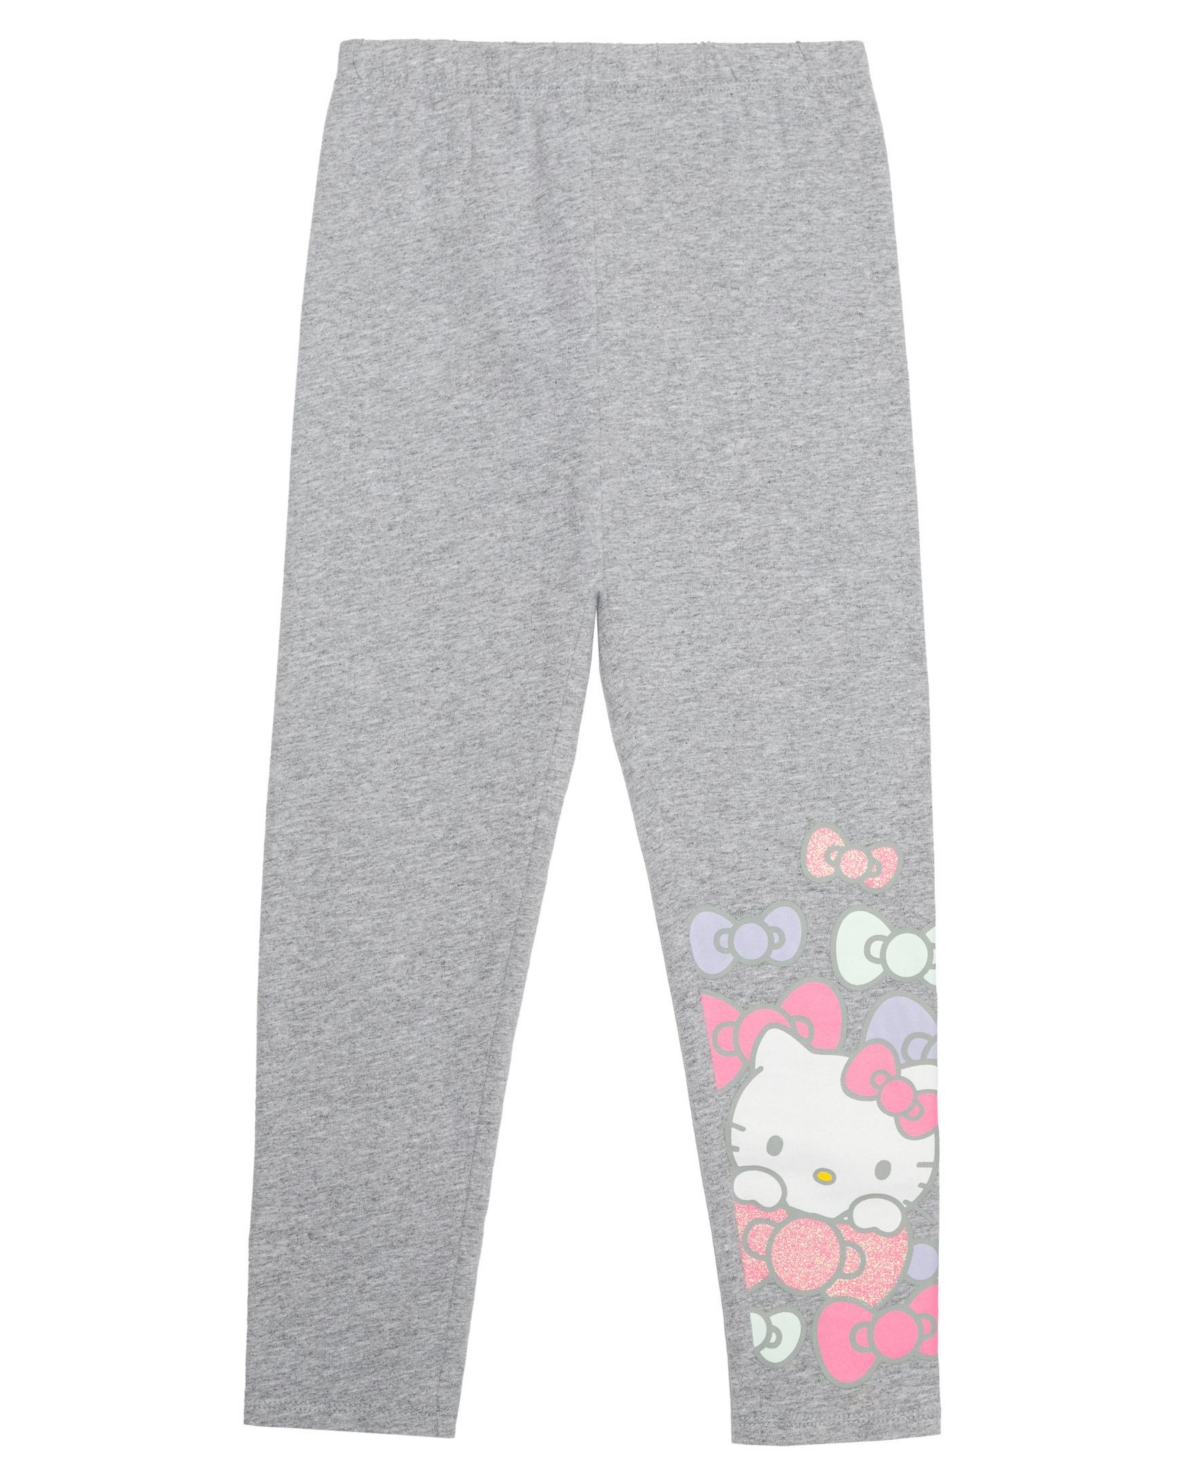 HELLO KITTY TODDLER GIRLS BOWS RELAXED FIT LEGGINGS